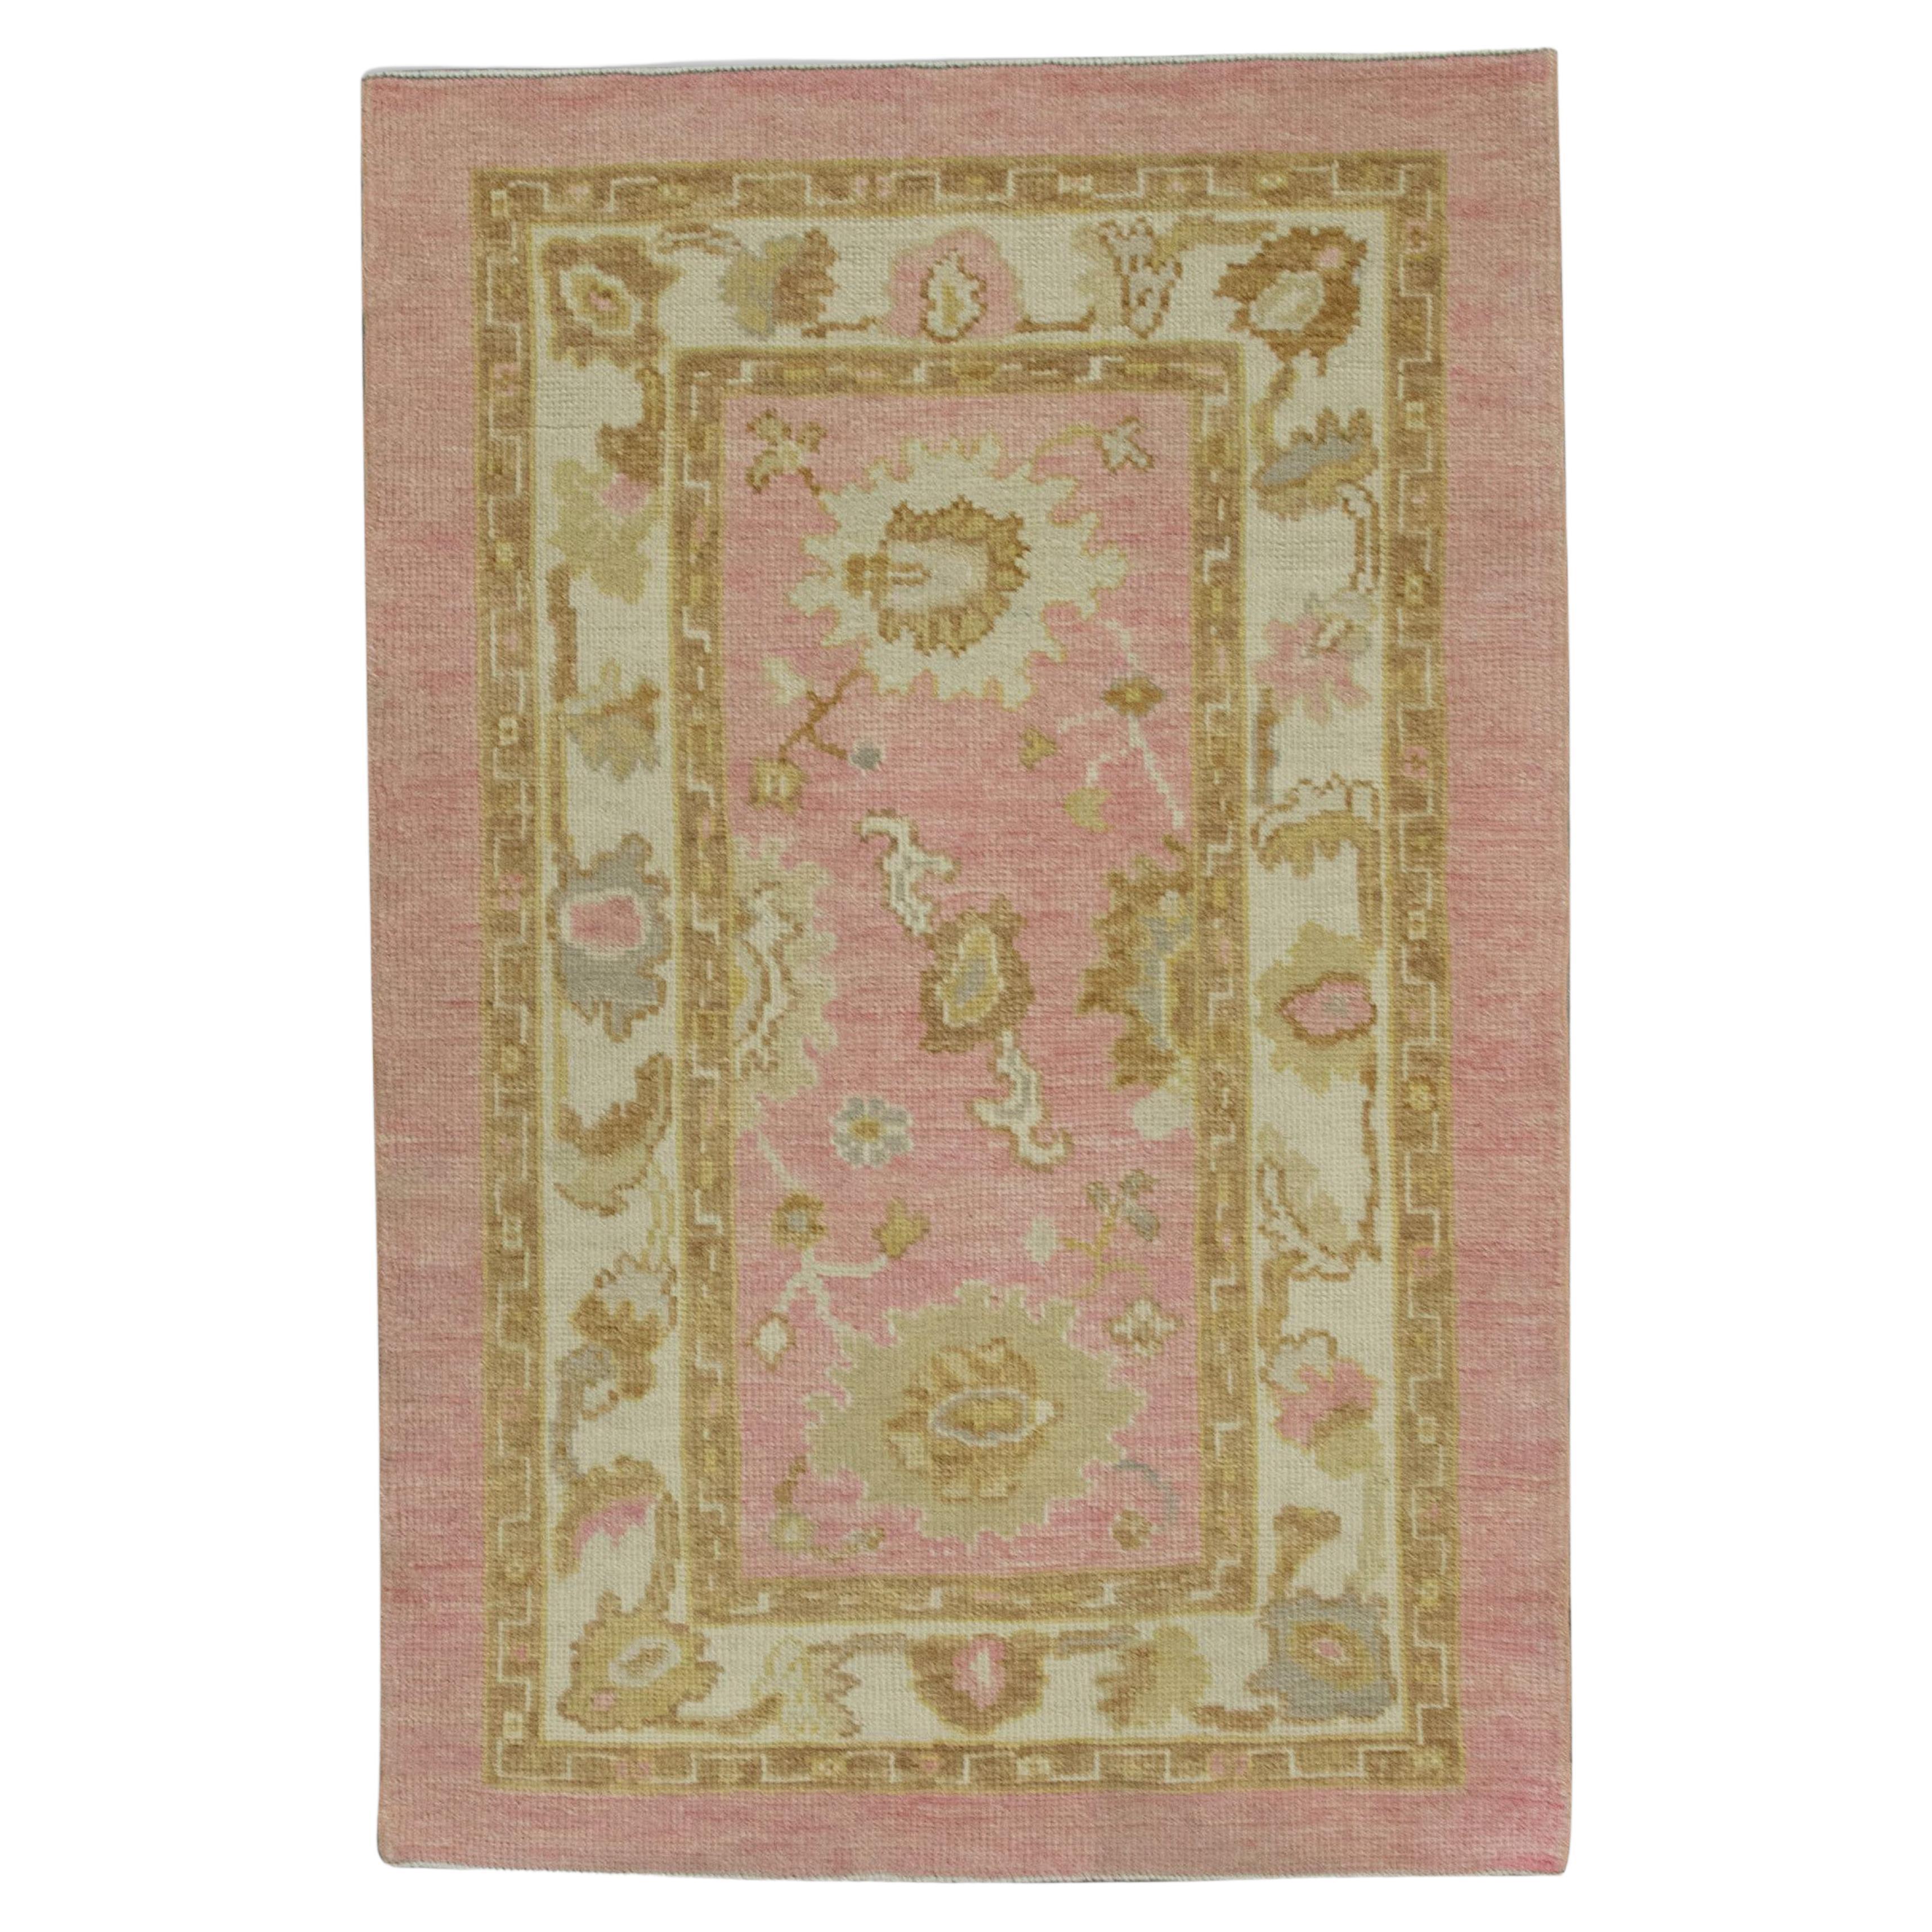 Pink & Yellow Floral Design Handwoven Wool Turkish Oushak Rug 3' x 4'8" For Sale